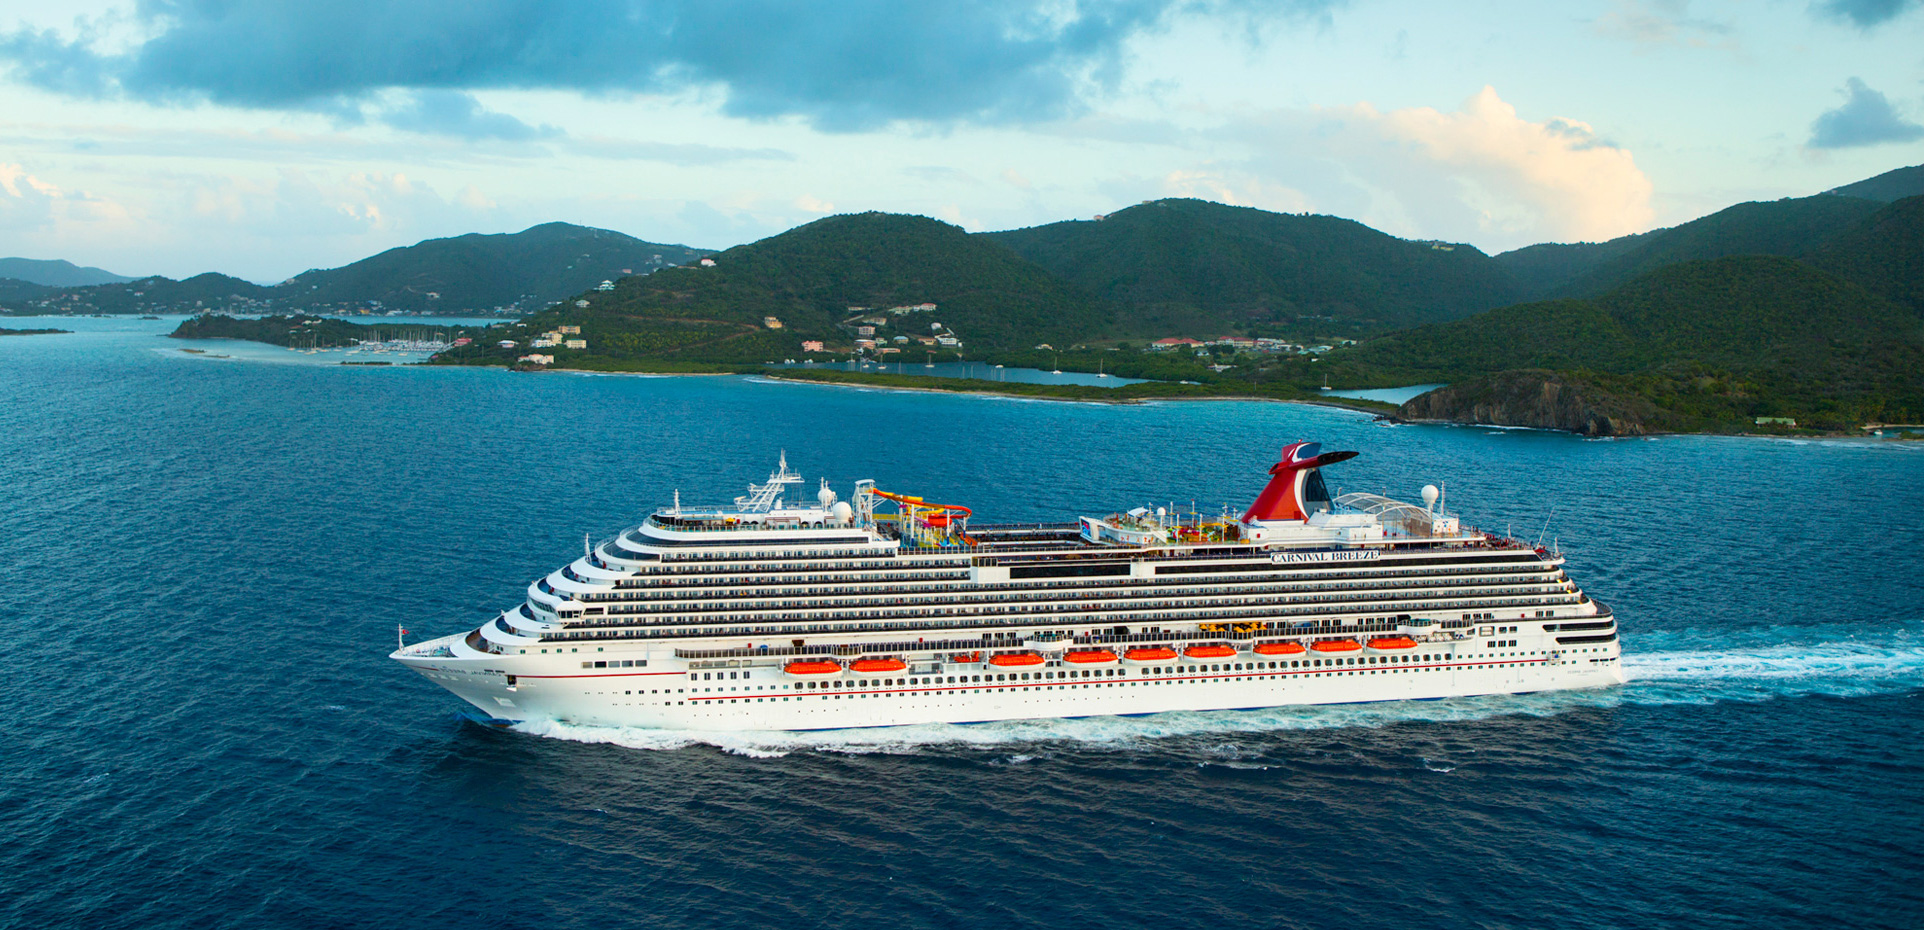 Carnival Breeze Photos, cabins, itineraries and deals Cruisetopic